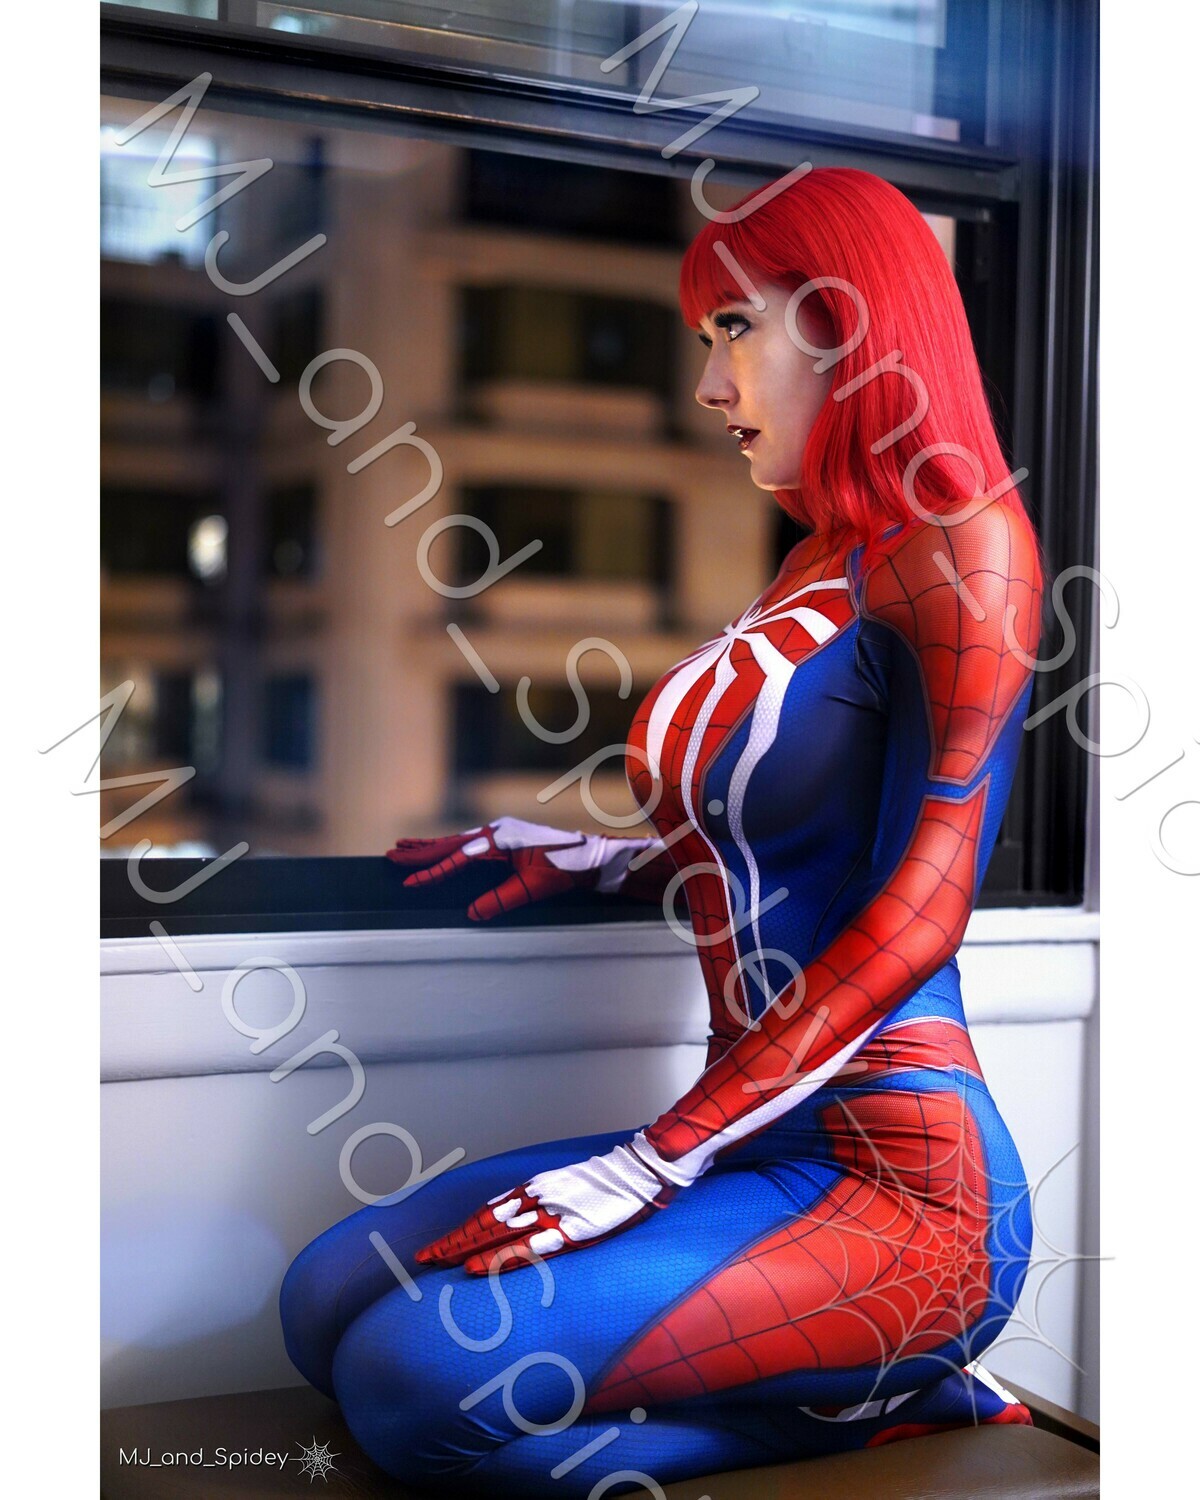 Marvel - Spider-Man - Mary Jane Watson - PS4 Insomniac Spider-Suit No. 1 - Digital Cosplay Image (@MJ_and_Spidey, MJ and Spidey, Comics)